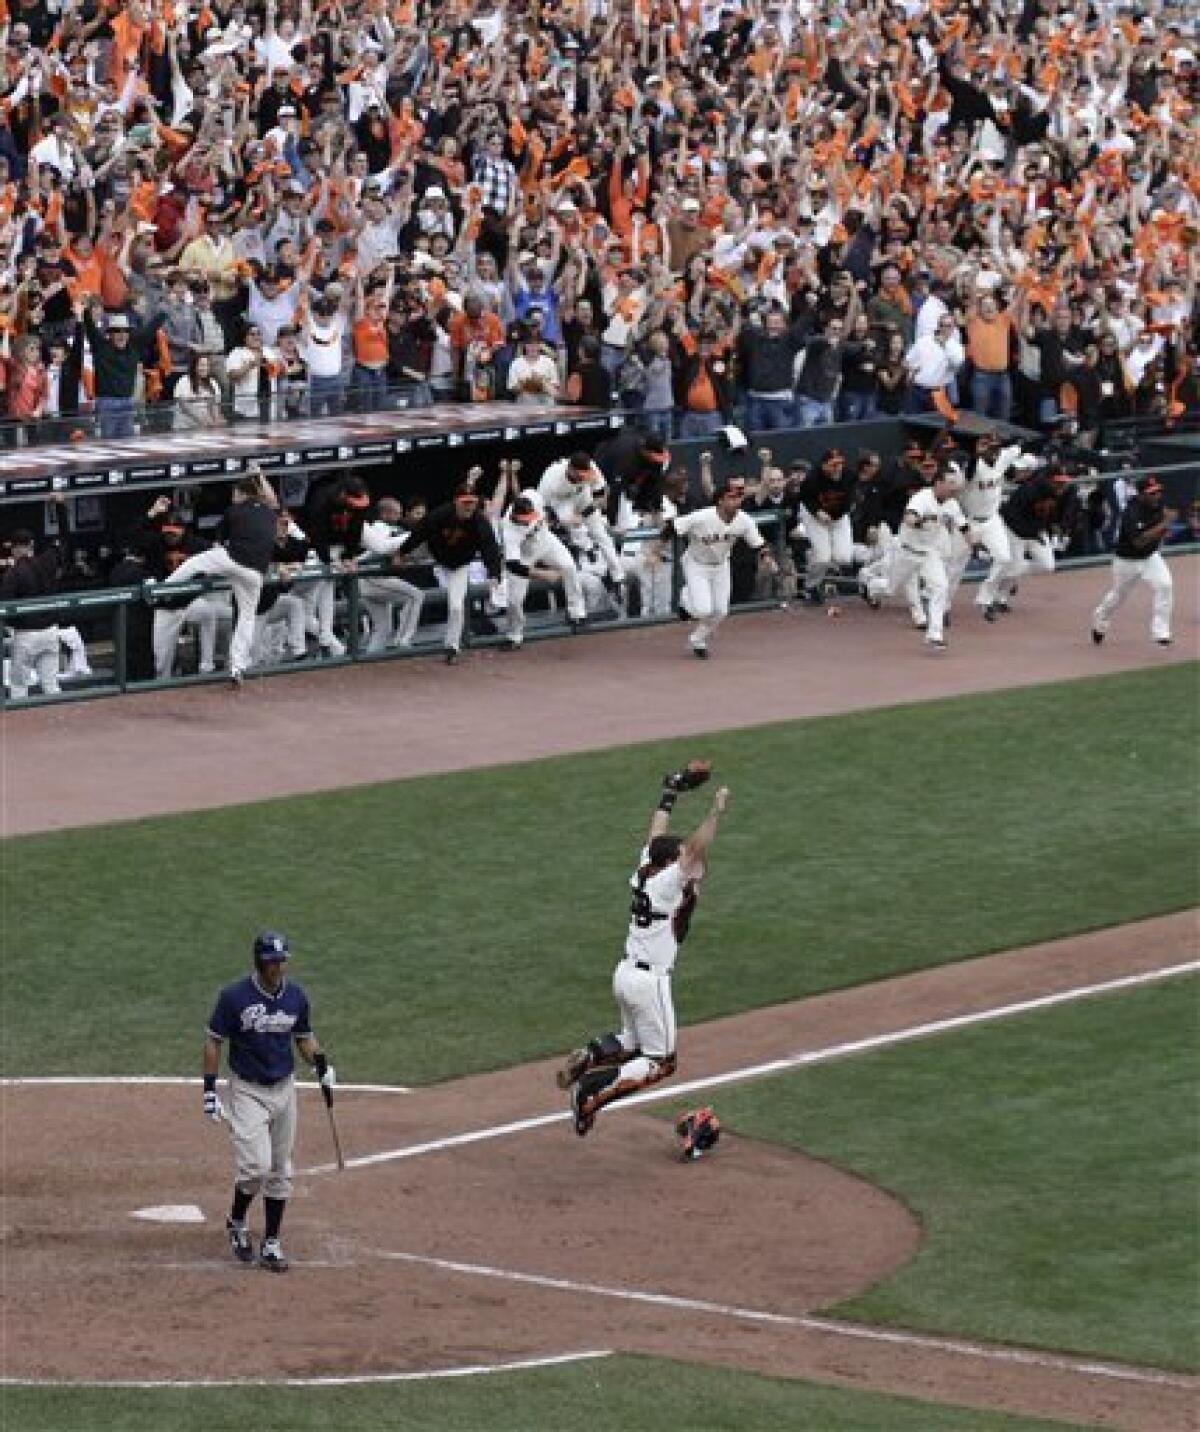 Giants clinch NL West crown by beating Padres – Times Herald Online